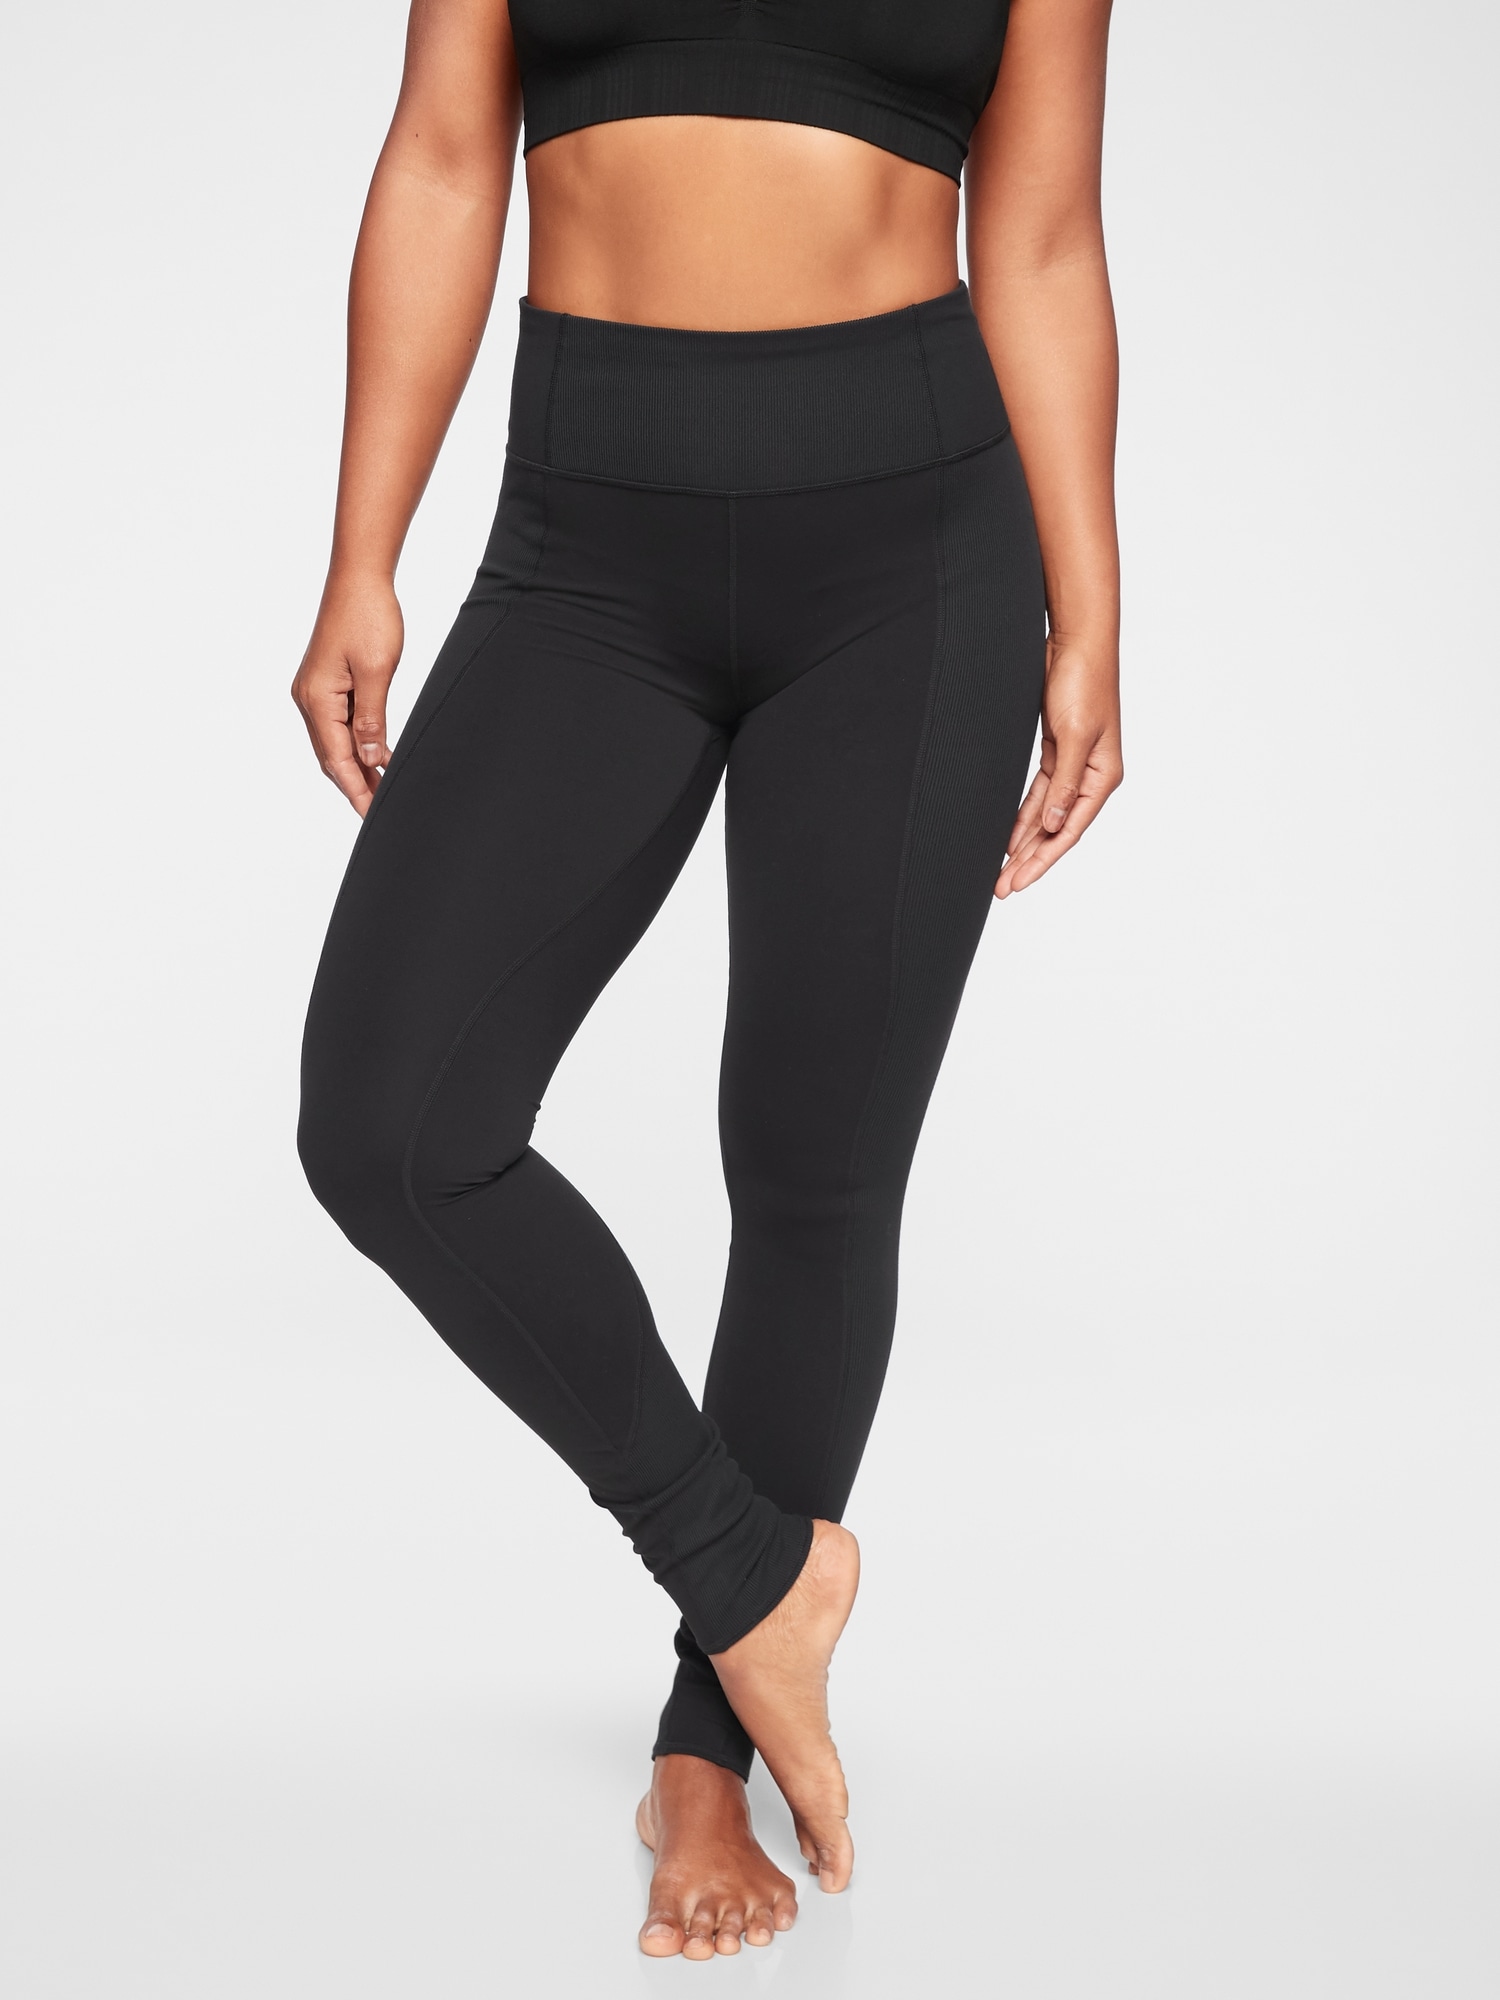 Athleta Ribbed Athletic Tights for Women